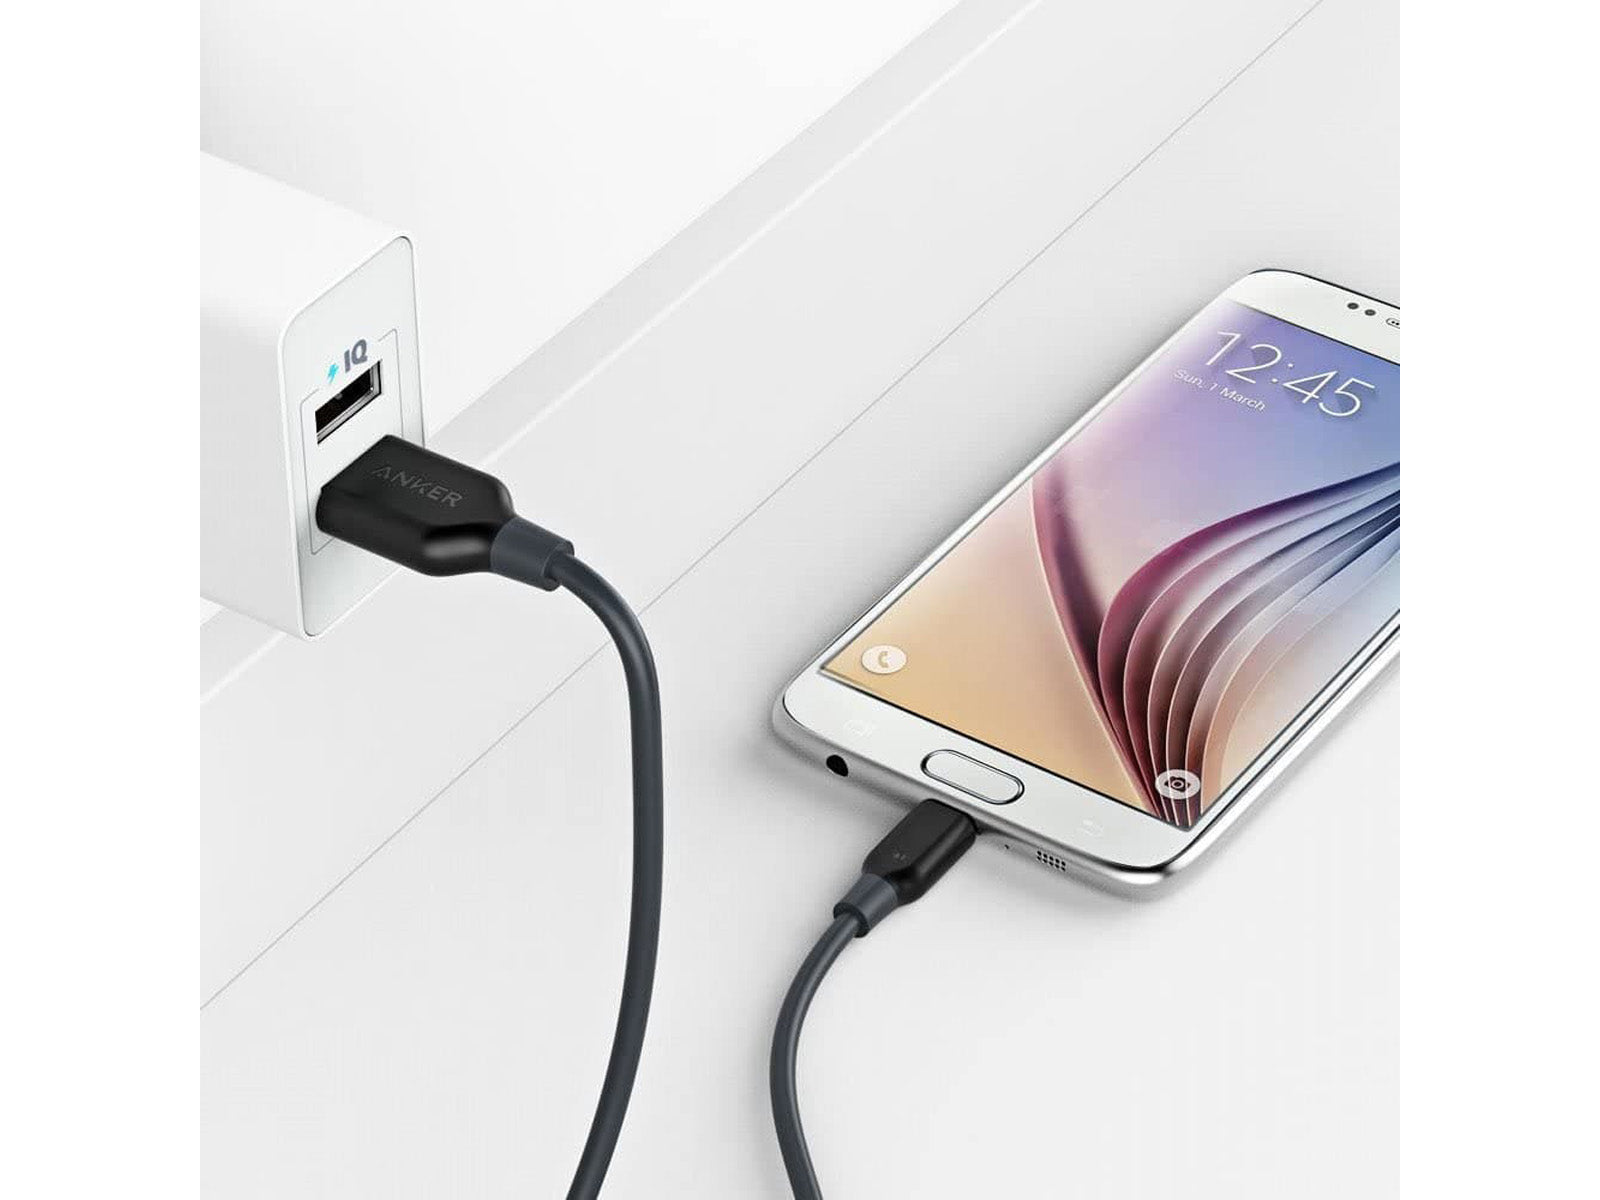 PowerLine Select Micro USB High-Speed Charging Cable Plugged iinto Phone